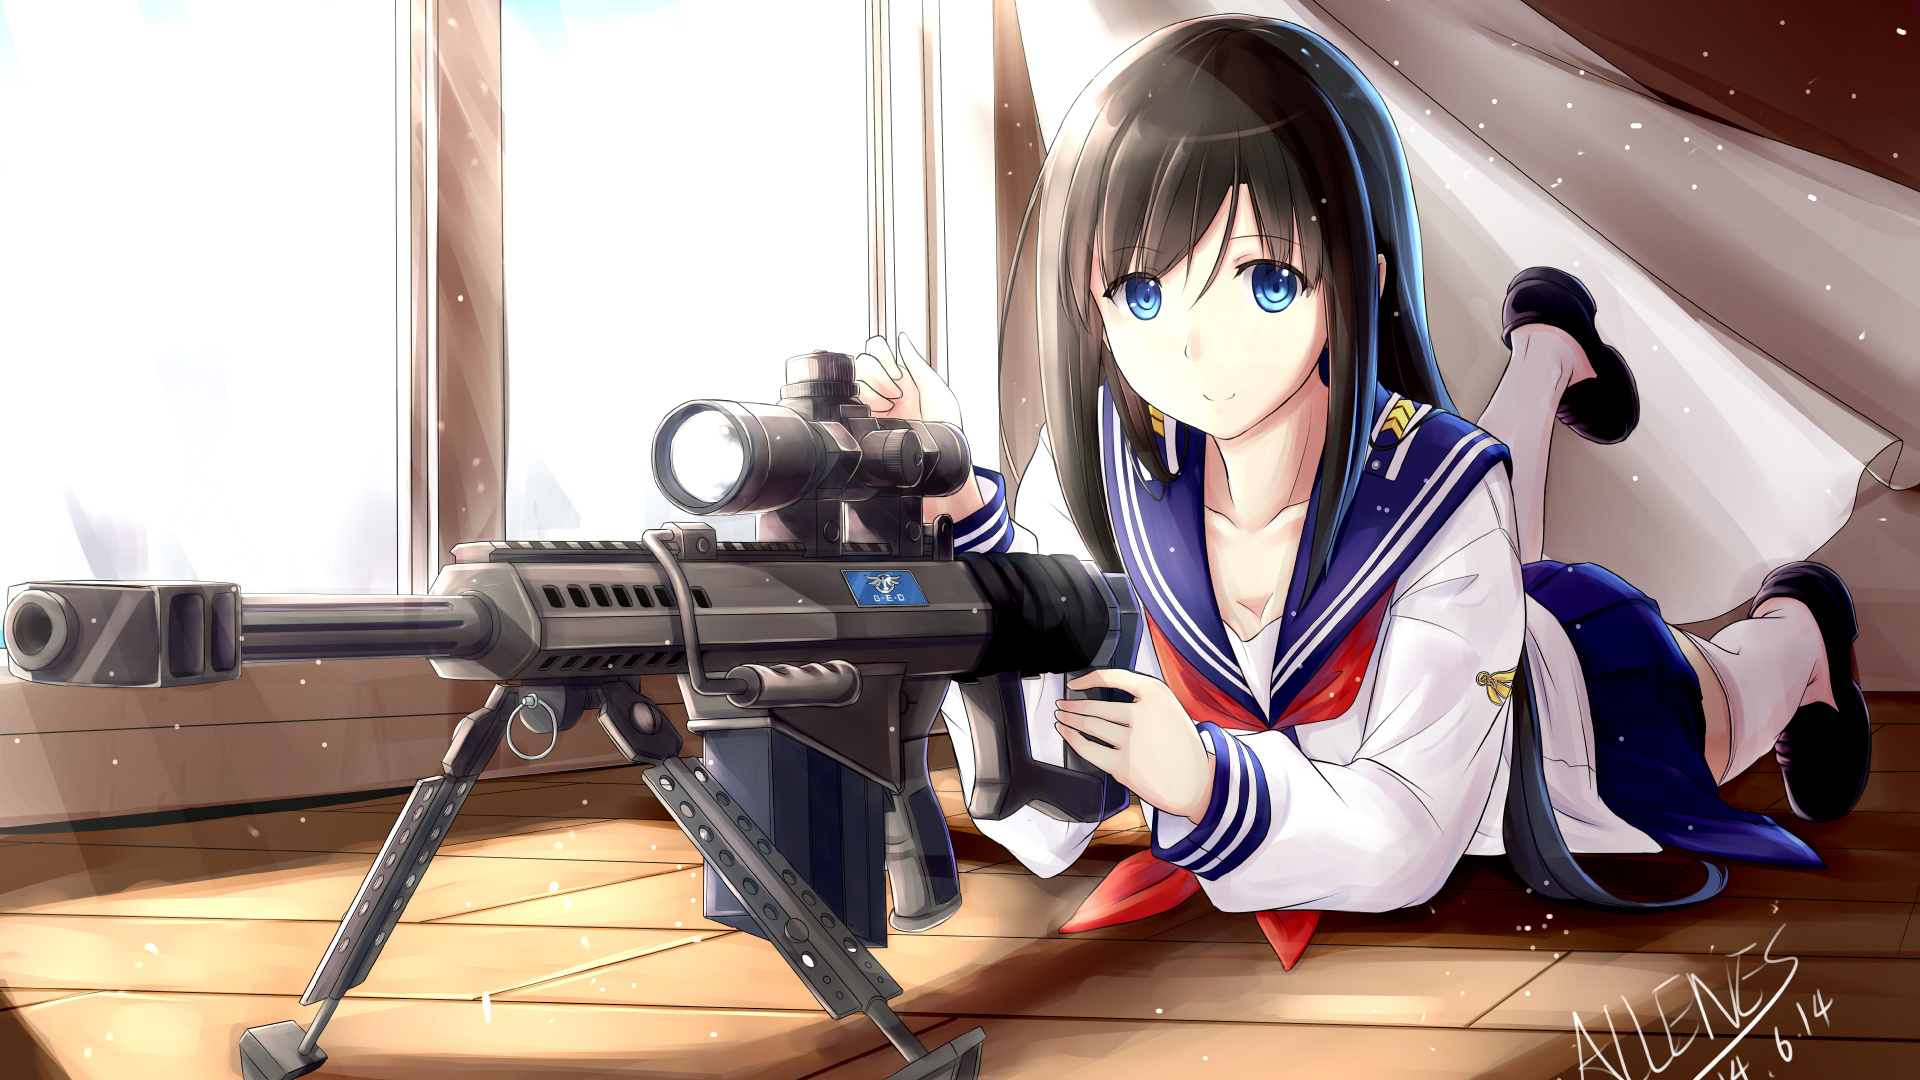 Woman in White and Blue Jacket Holding Black Rifle. Wallpaper in 1920x1080 Resolution